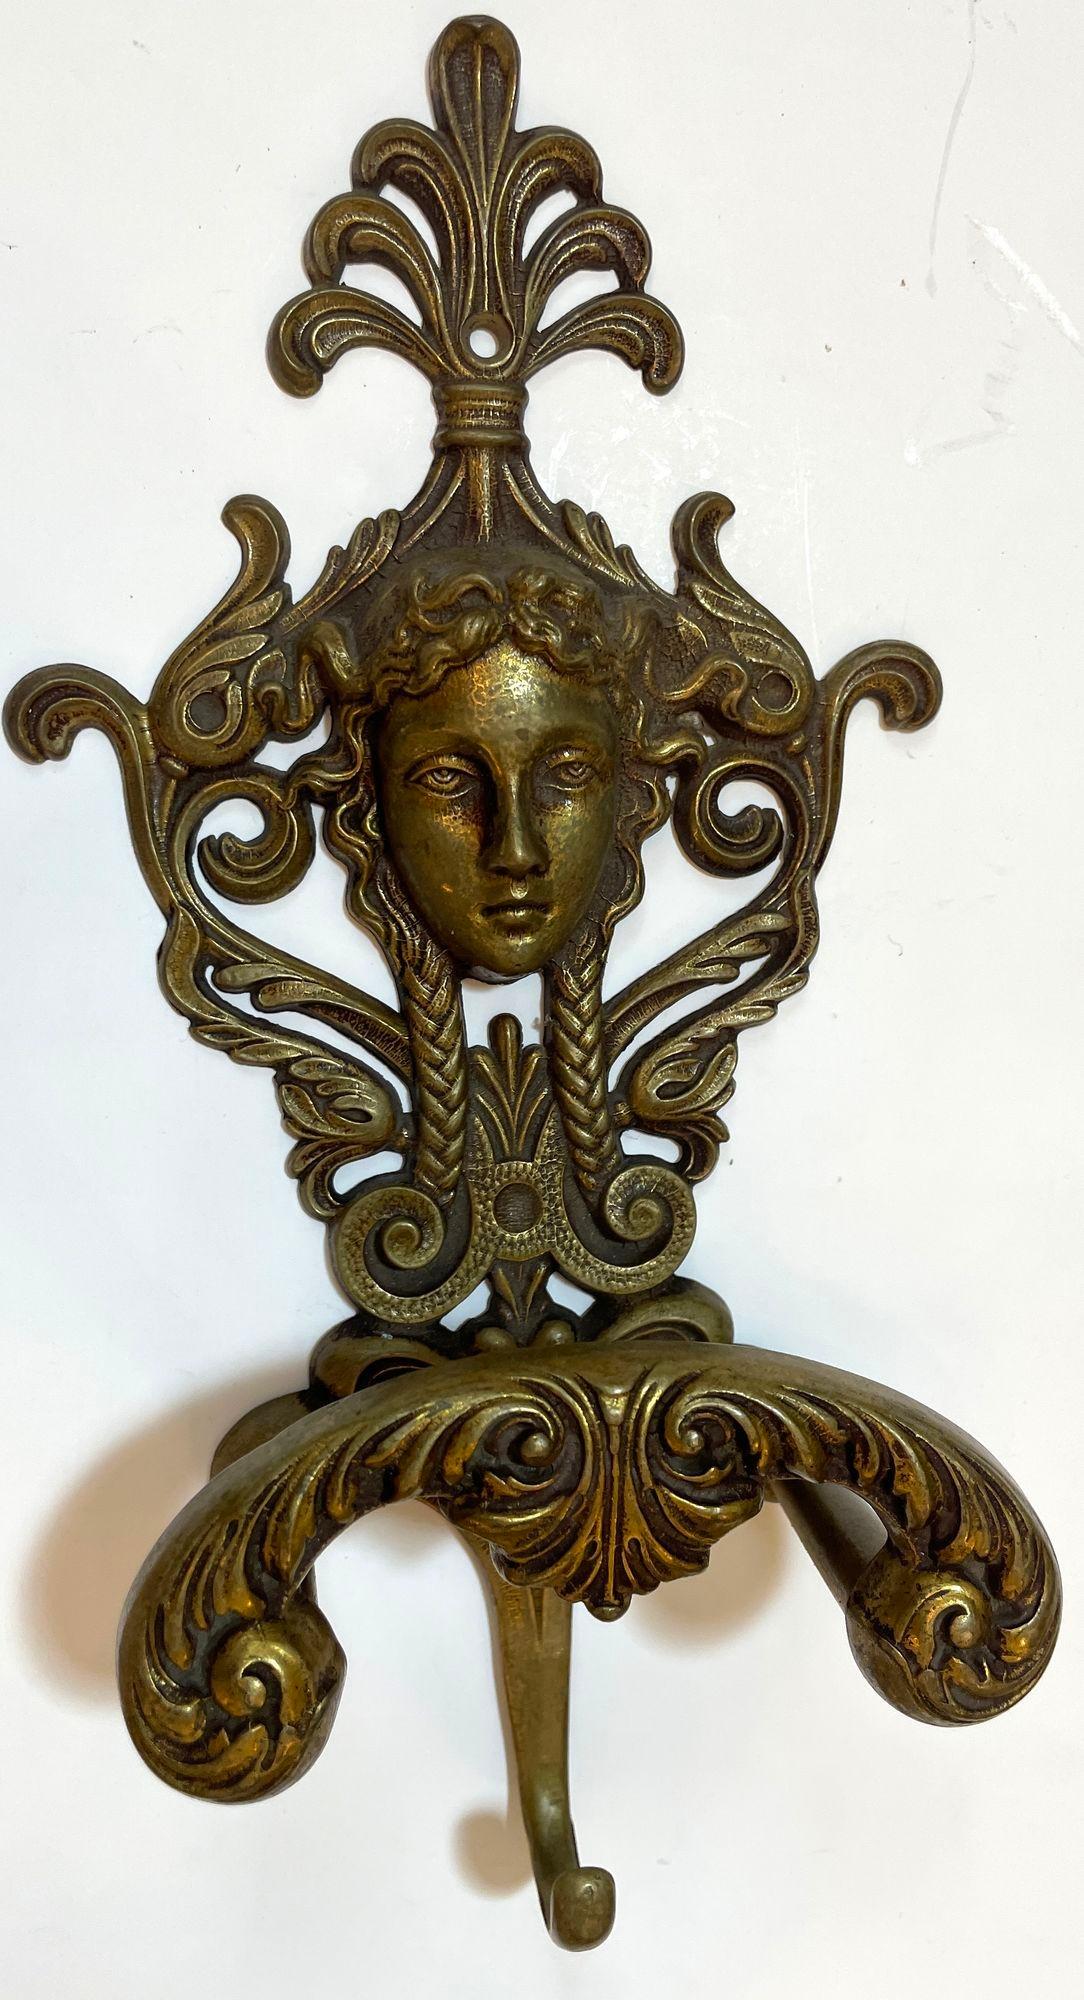 Antique Ornate Italian Figural Architectural Cast Brass Wall Hook Decor Set of 3 For Sale 12